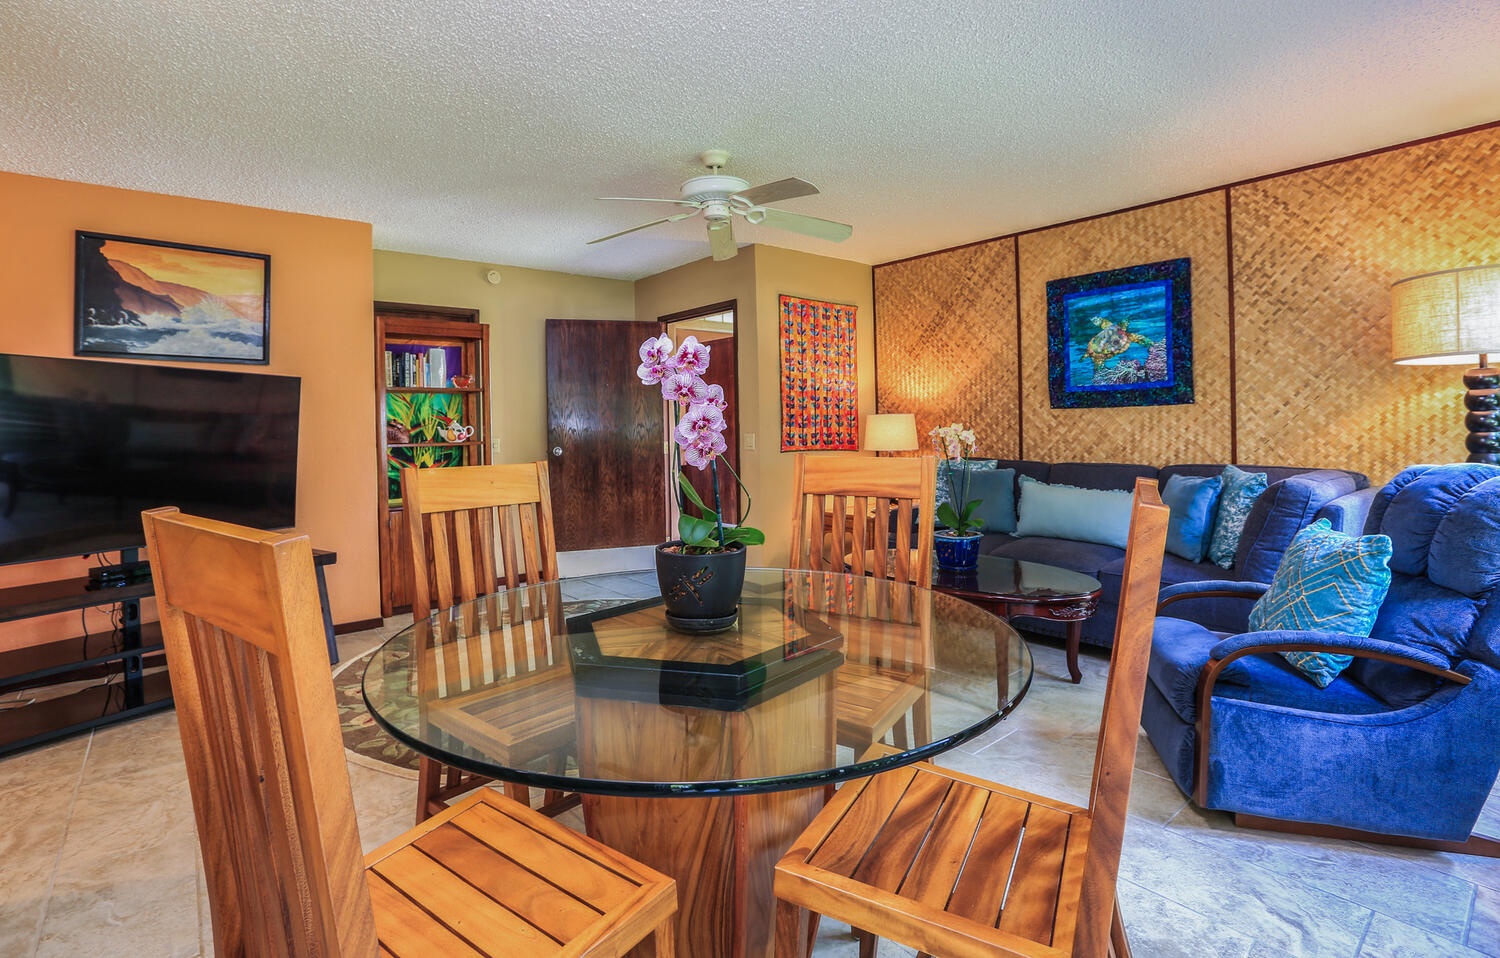 Princeville Vacation Rentals, Hideaway Haven - Glass dining table with four seats adjacent to the living area